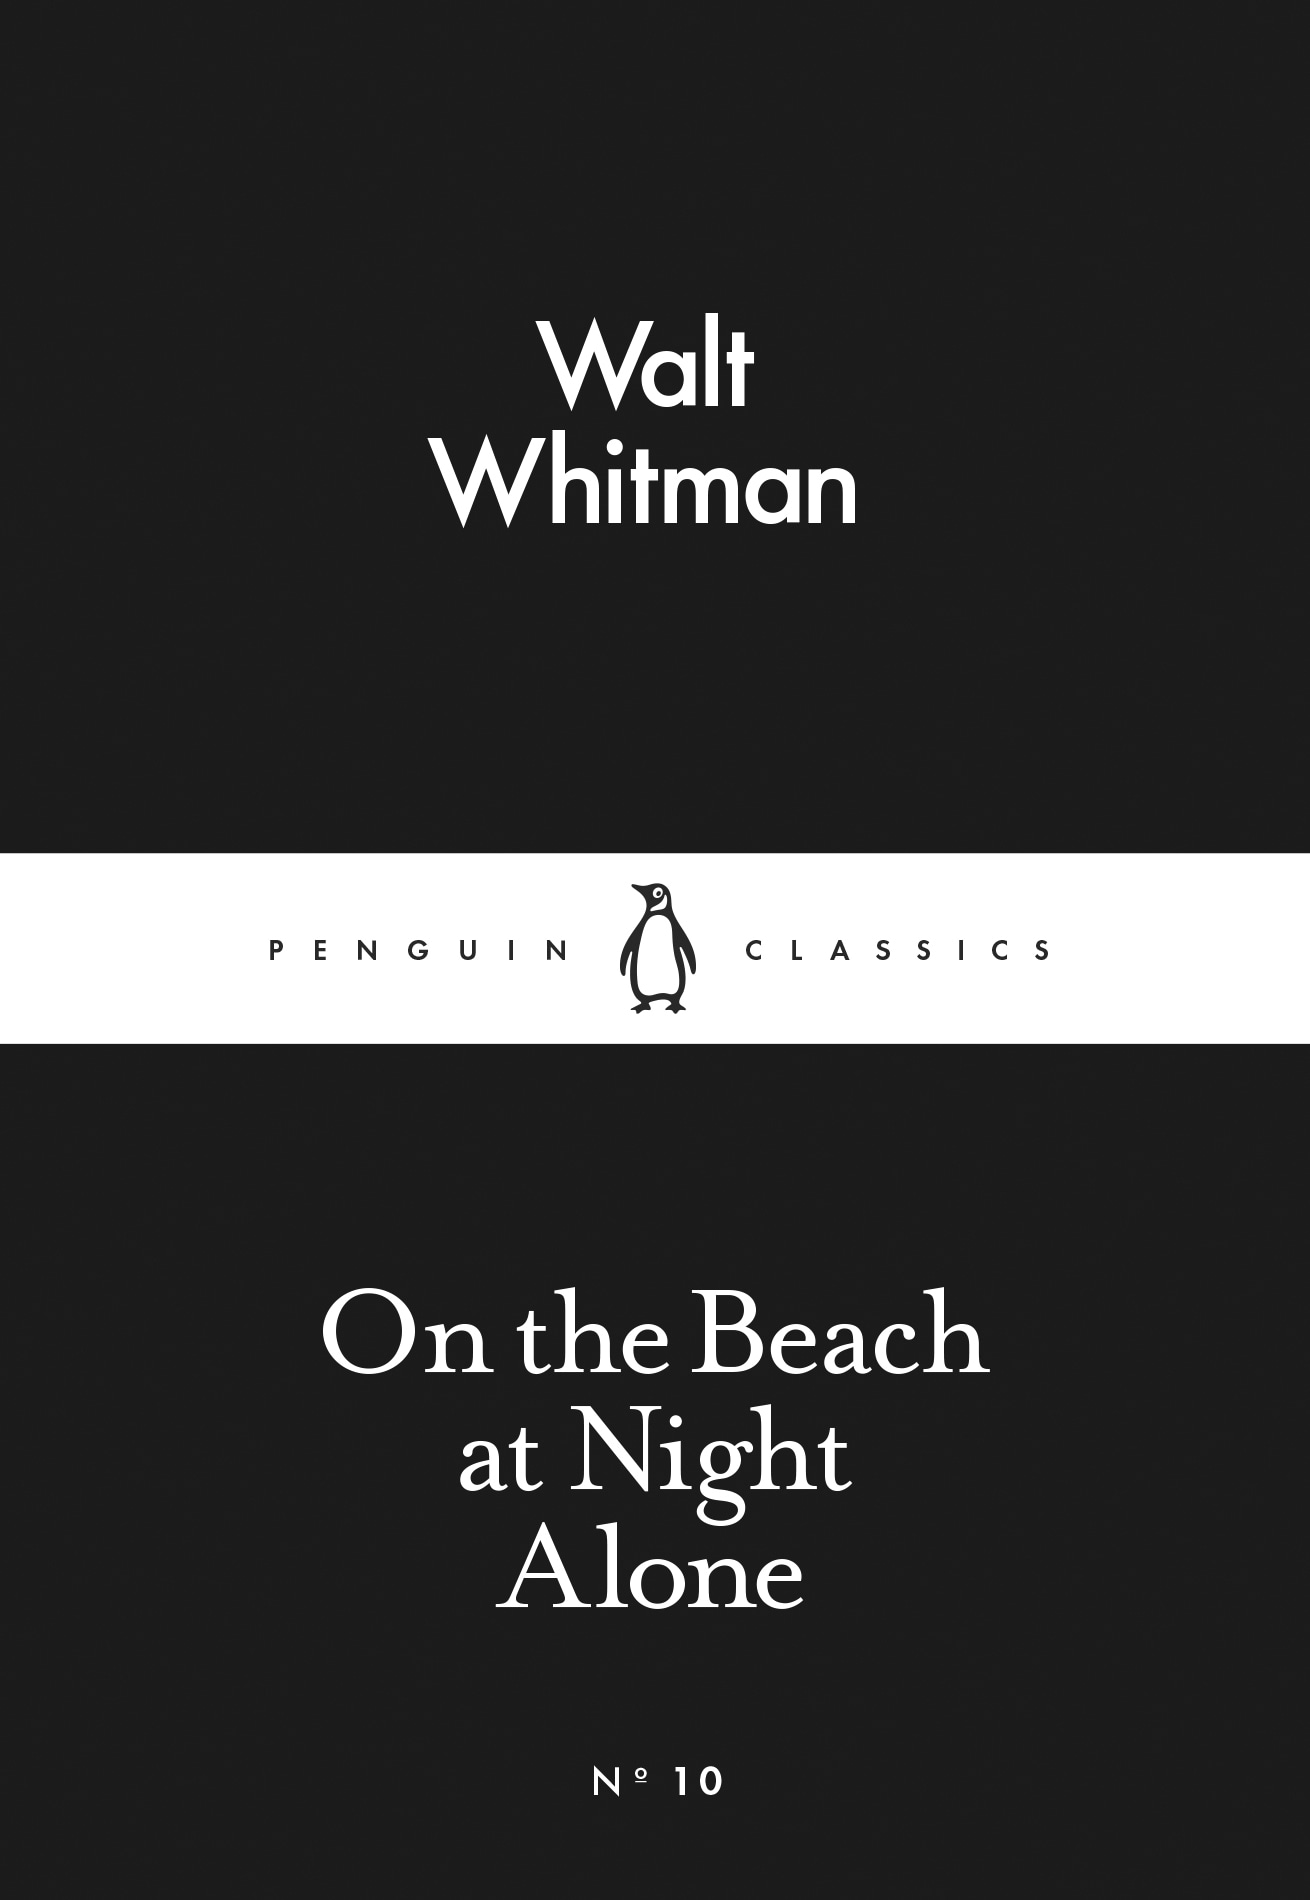 Book “On the Beach at Night Alone” by Walt Whitman — February 26, 2015